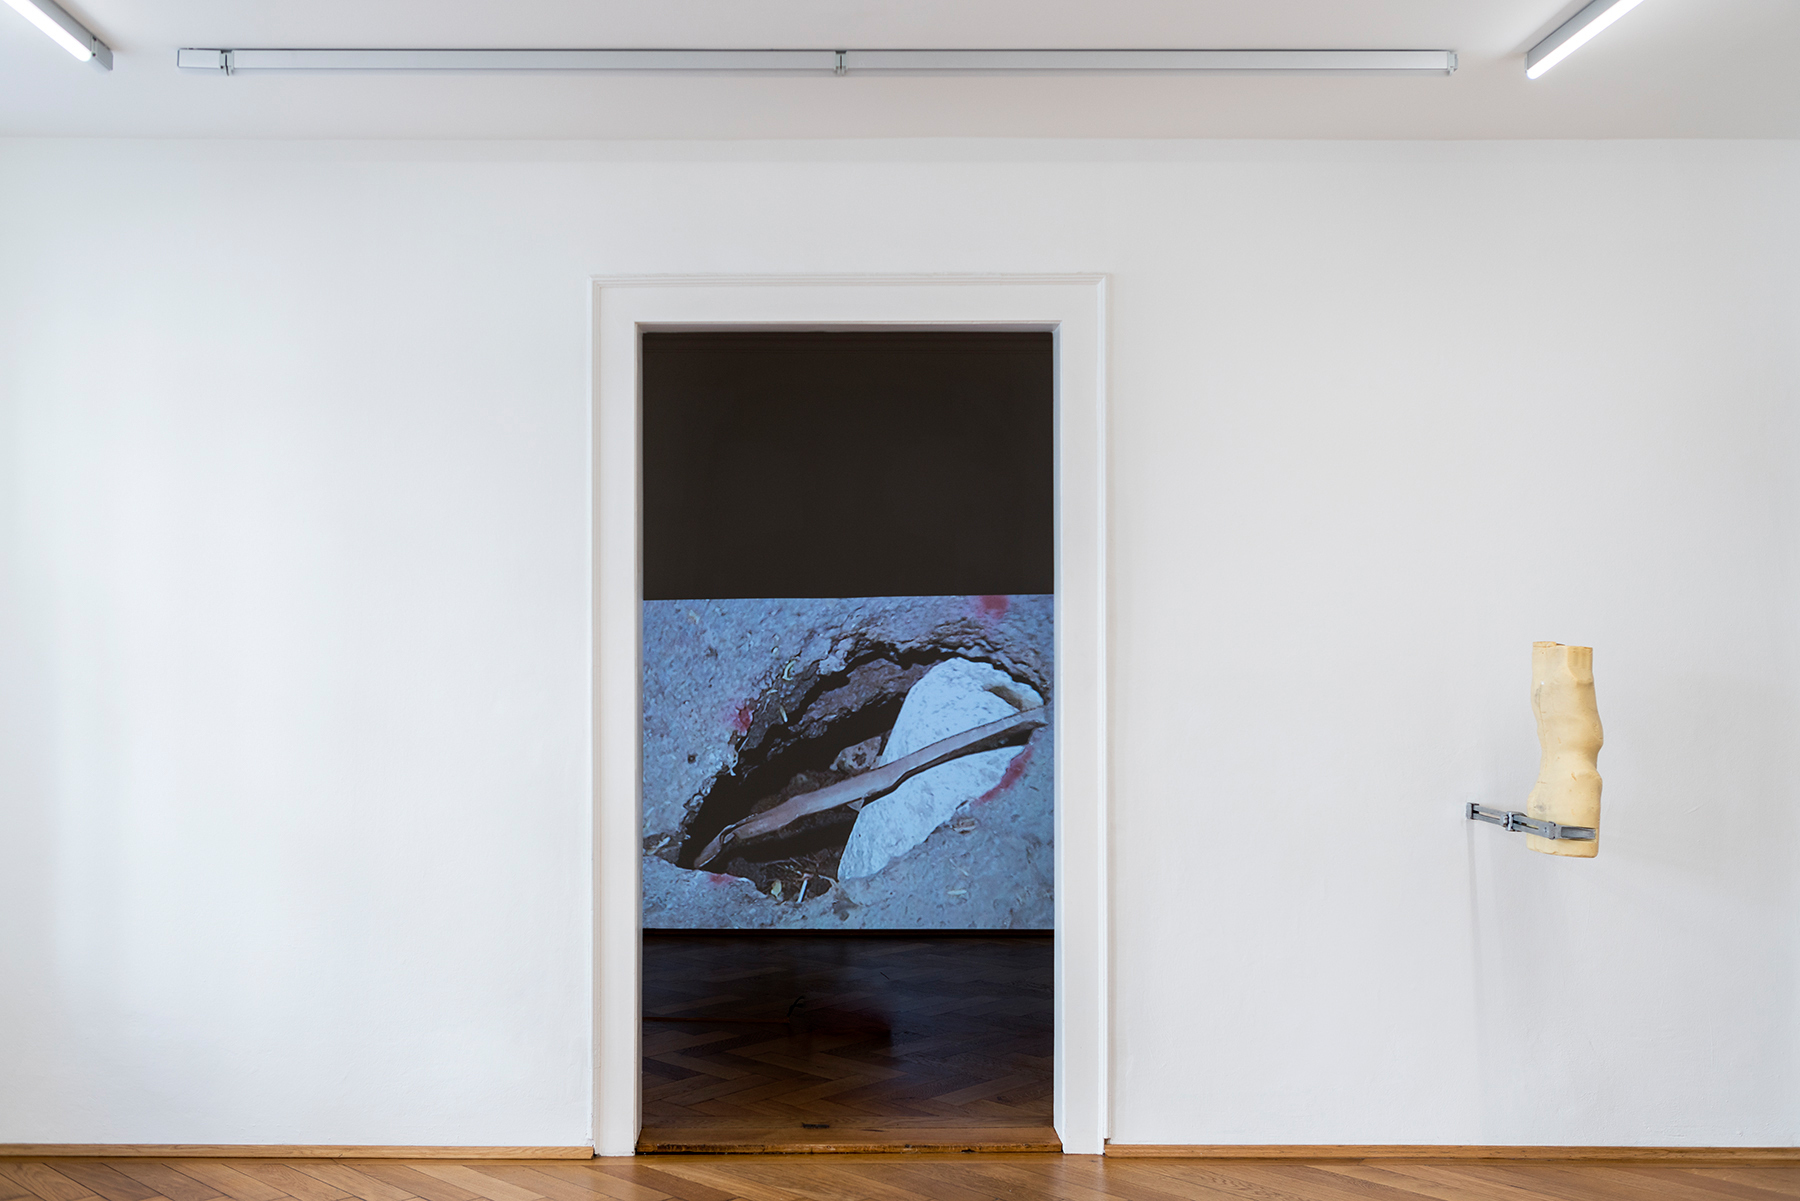 Installation view "The world is not like us...", Britta Rettberg, 2020, with works by Miguel Calderón and Berenice Olmedo